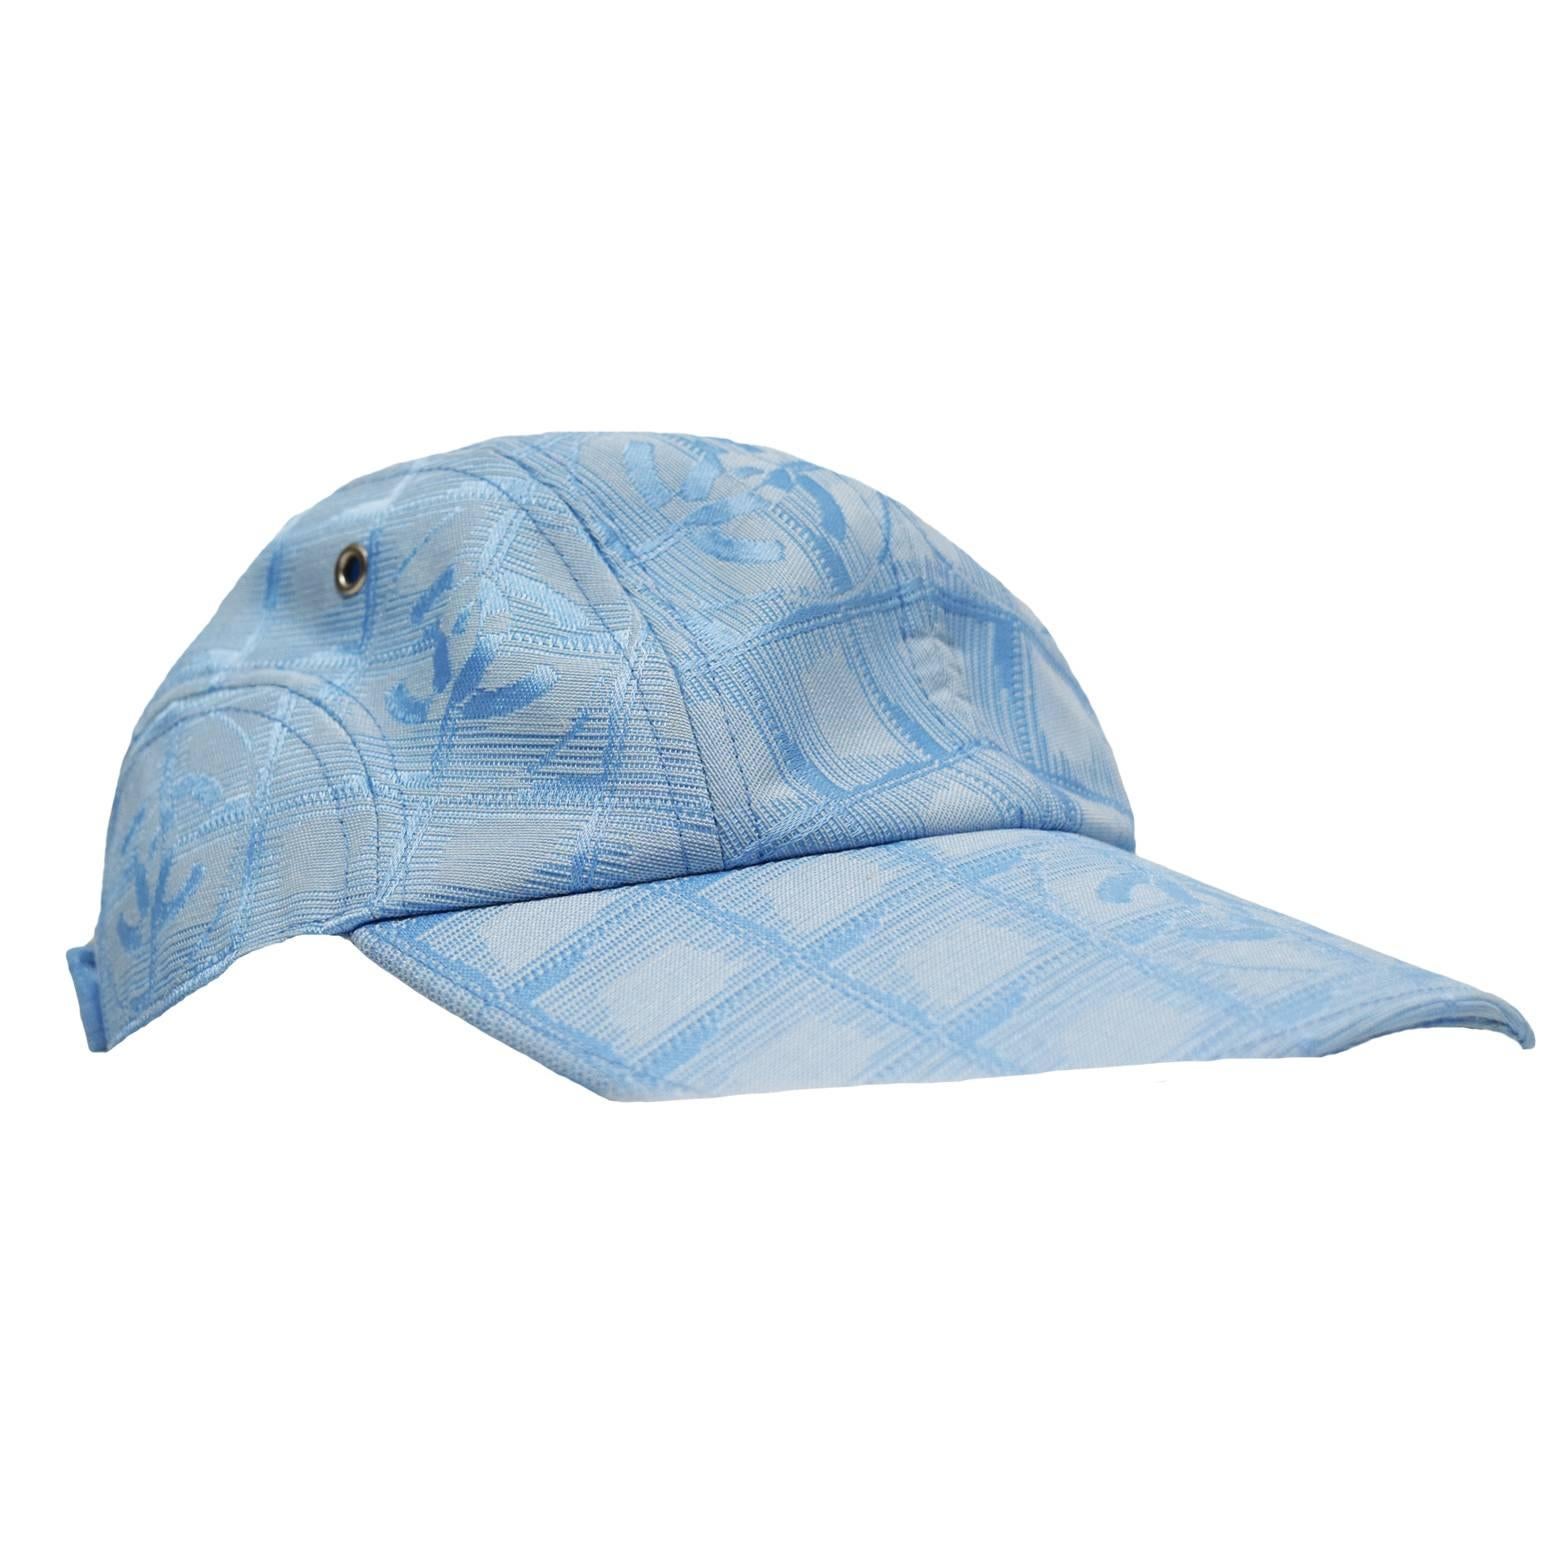 This Chanel cap is a ice blue canvas blend with silk monogram print. Adjustable strap located in the back with CC metal logo buckle.